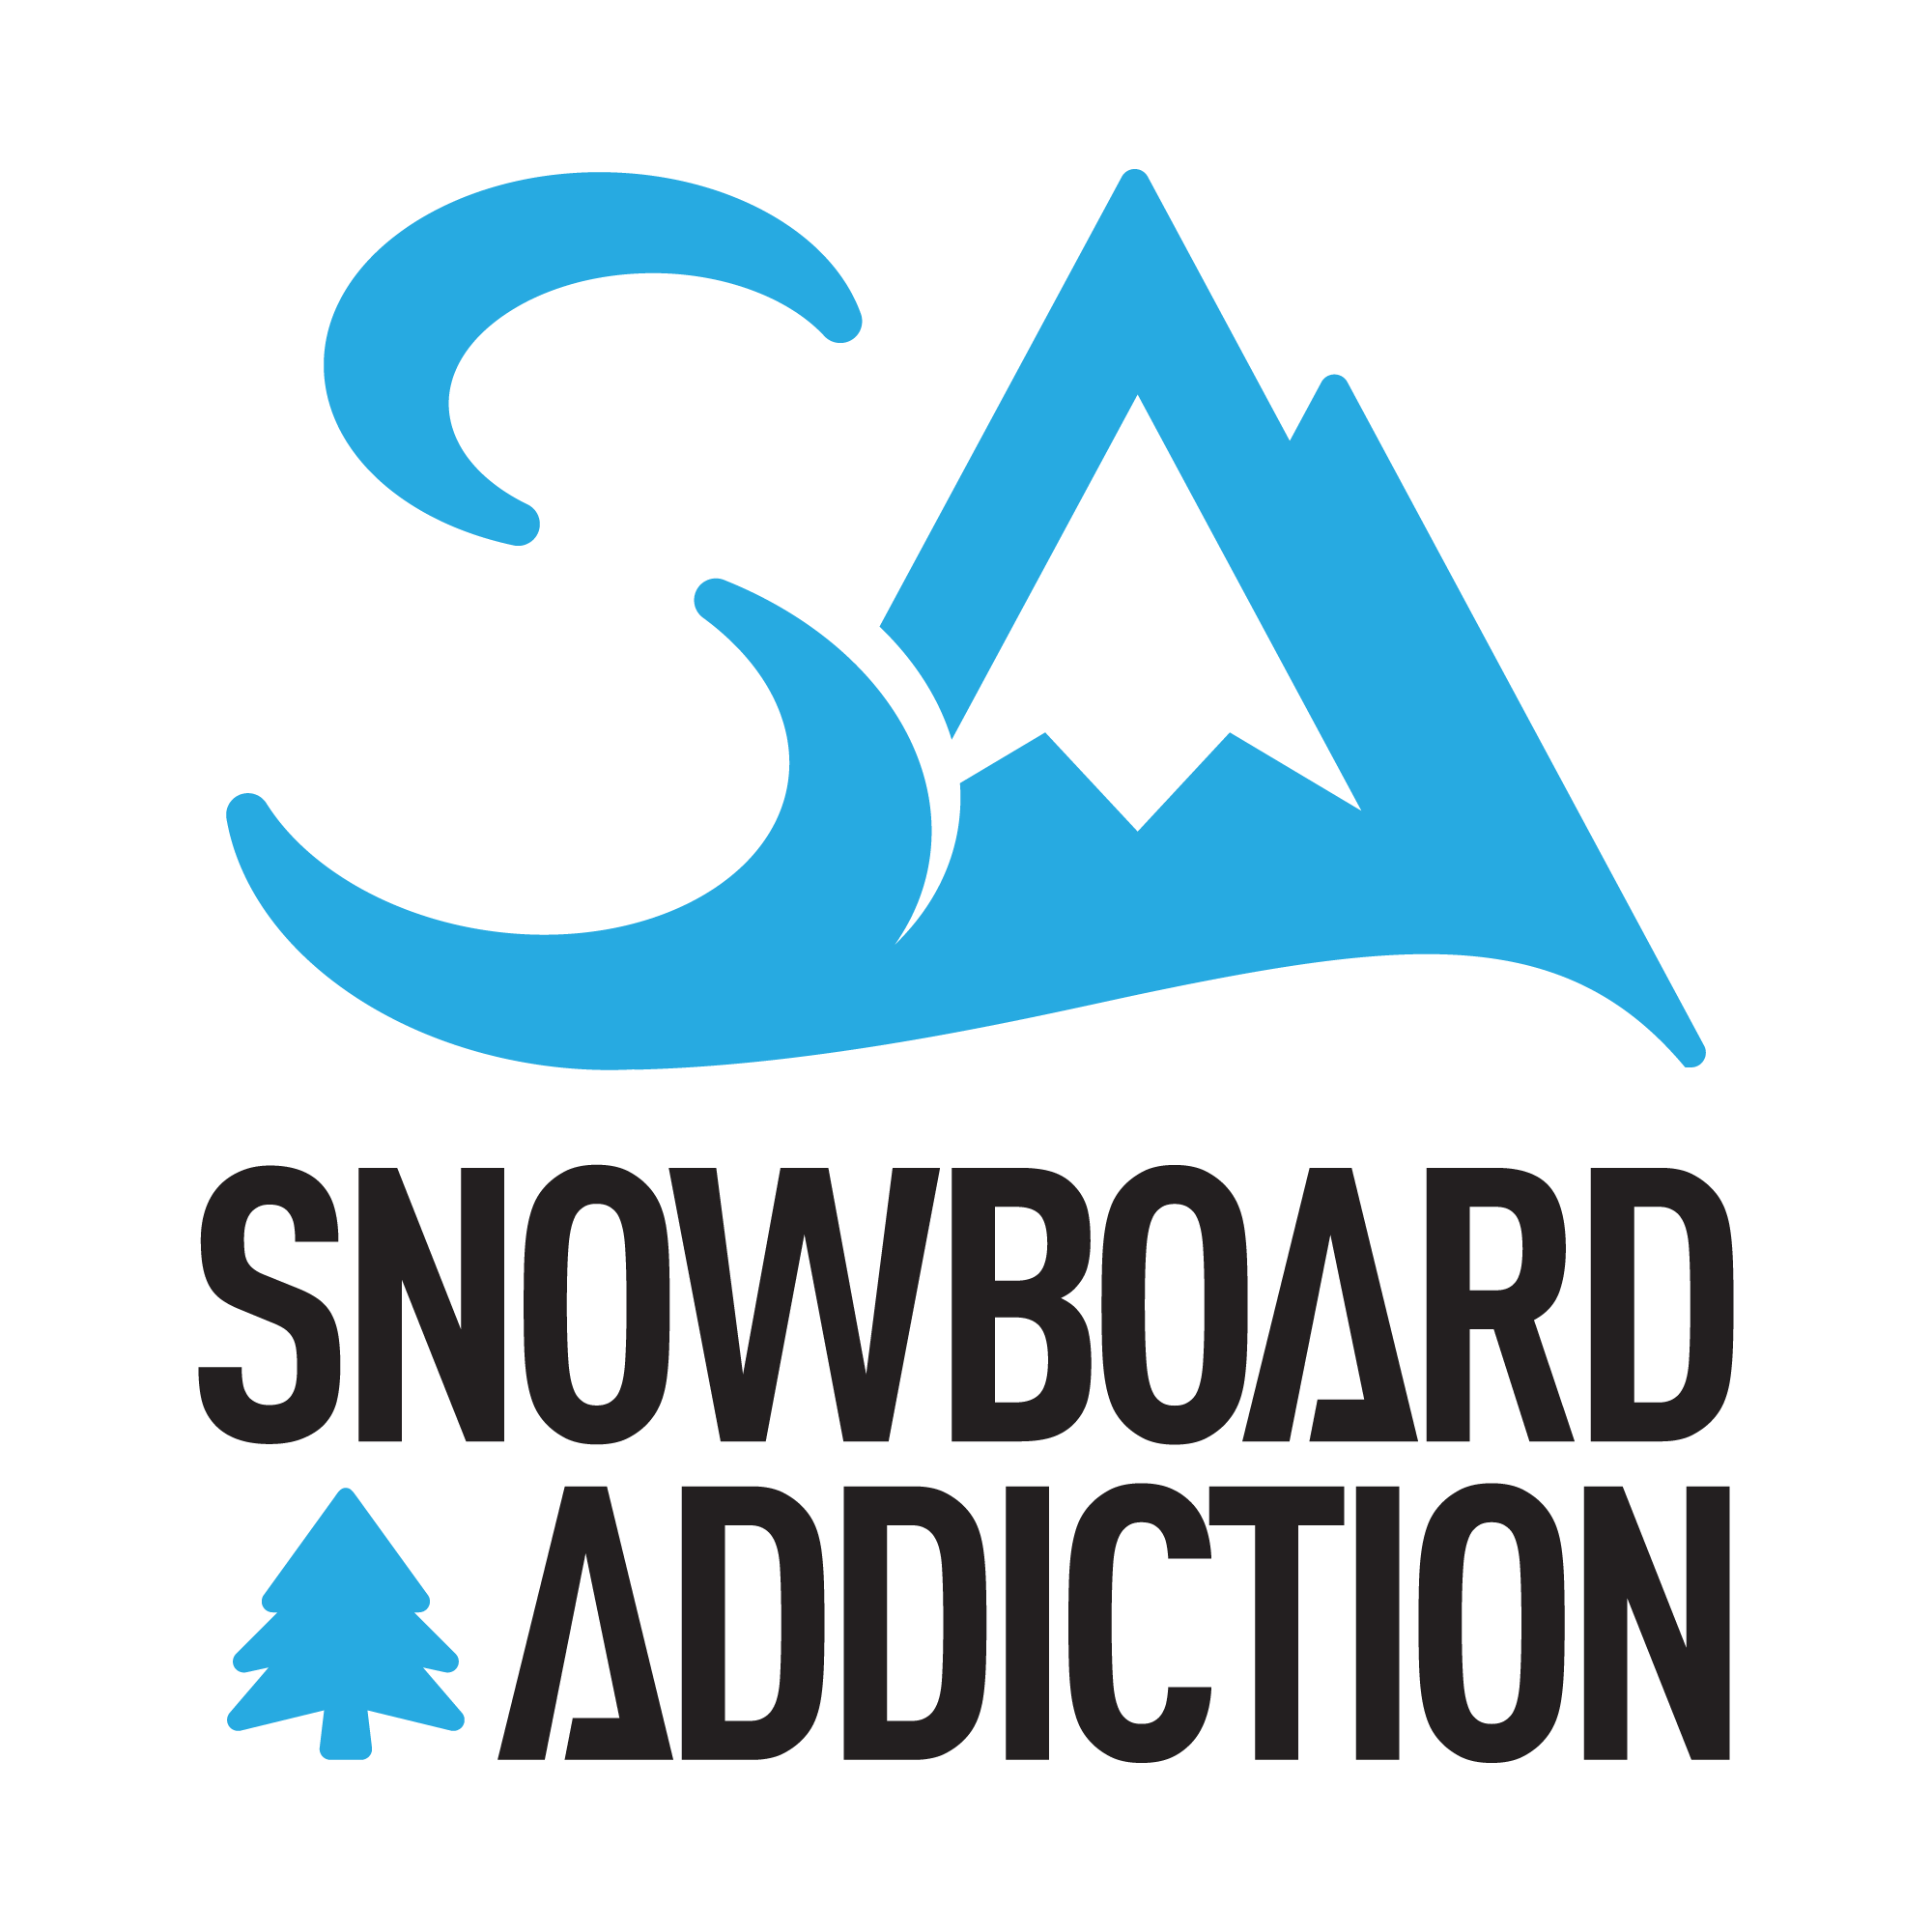 Snowboard Addiction Help Center home page